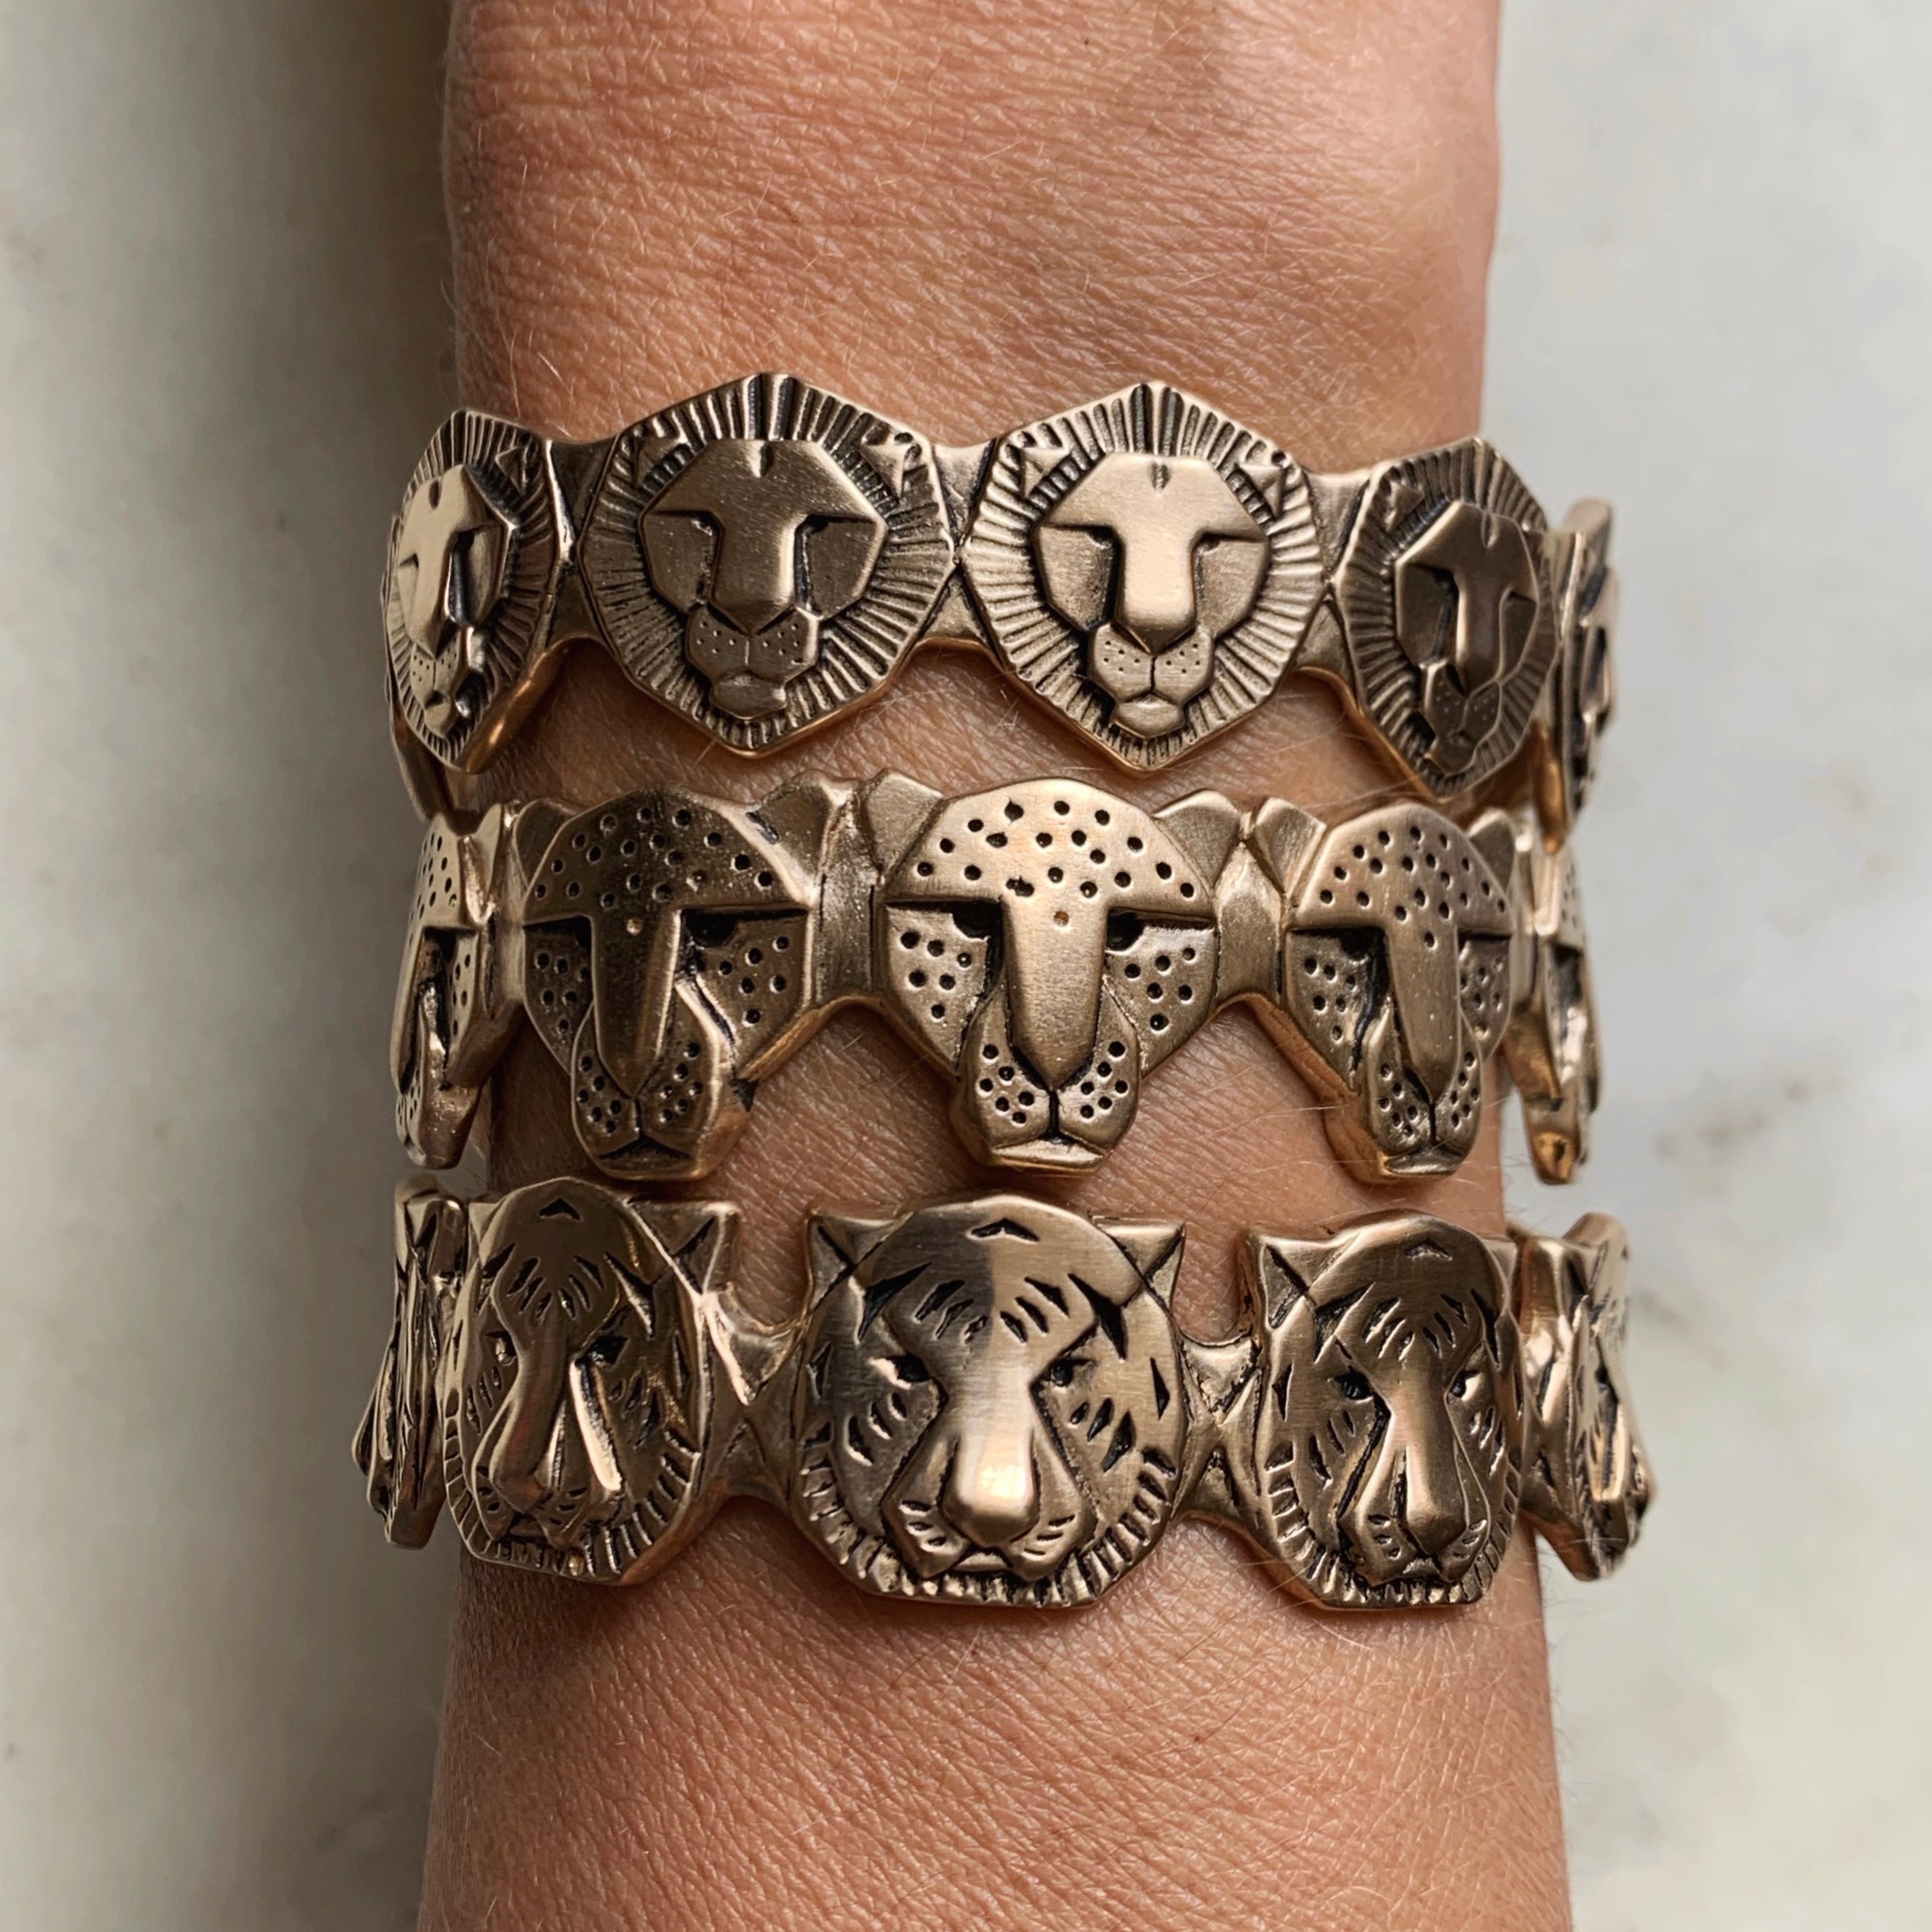 What Does the Lion Symbolize? – Himalaya Jewelry